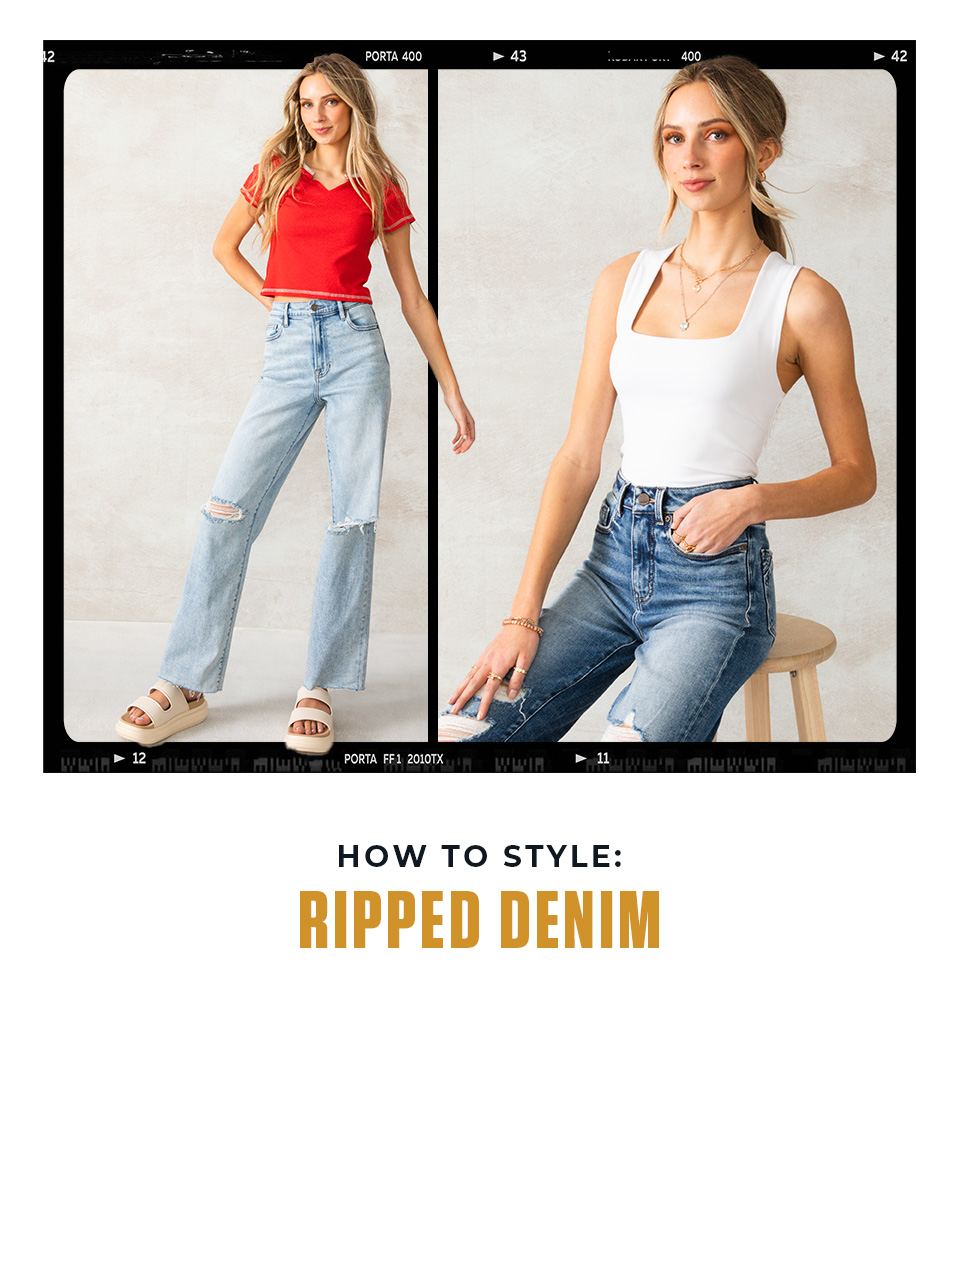 How to Style: Ripped Denim - A gal wearing a red cropped tee with a pair of light wash ripped wide-leg jeans and cream sandals